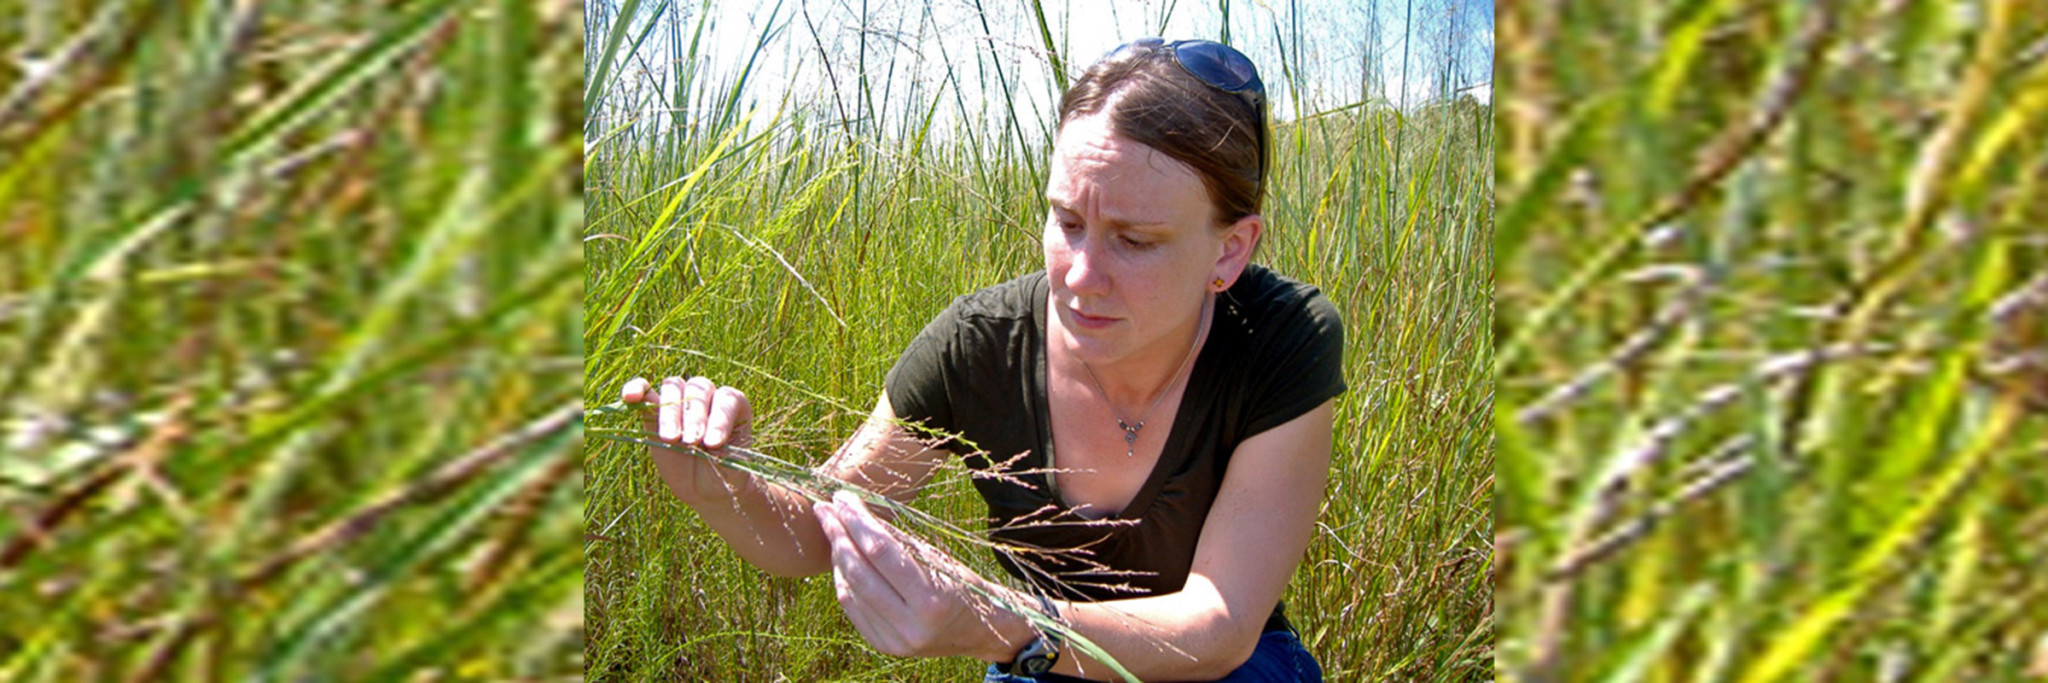 UnCommon Ground - Could Grass Save The World?